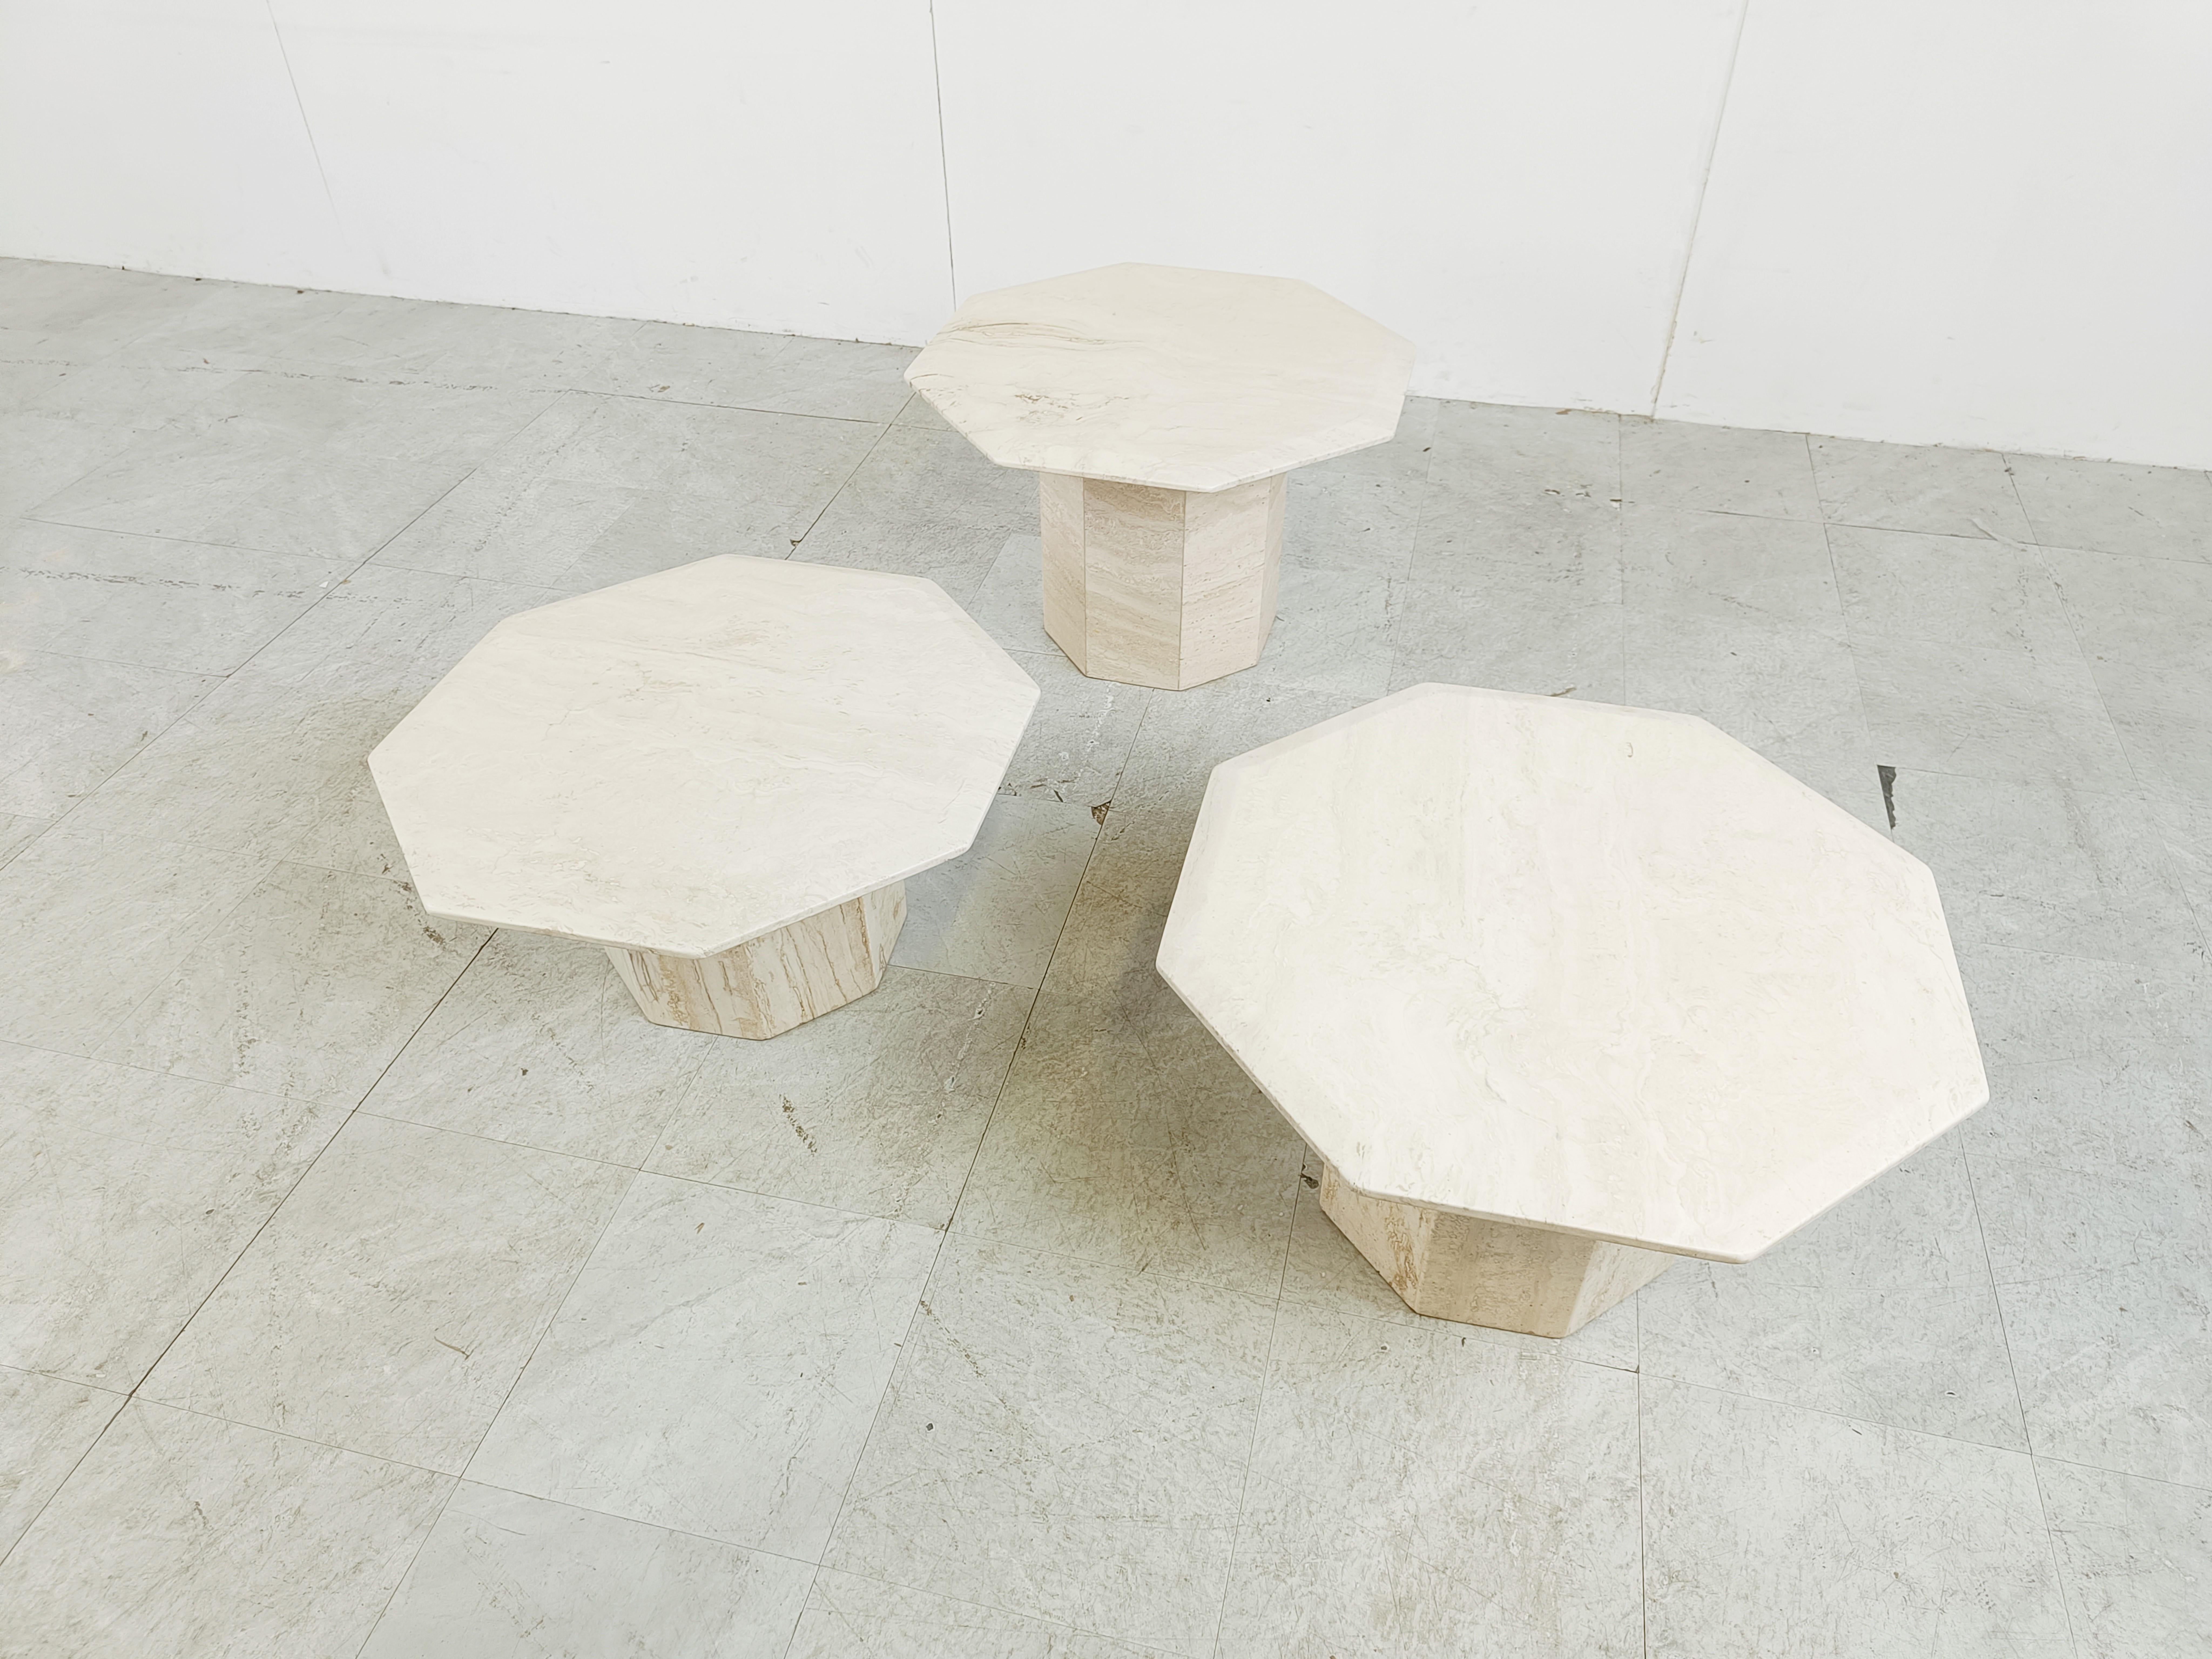 Set of 1970s italian travertine stone nesting tables or side tables with octogonal table tops.

The tables can be set up in different compositions. Timeless items.

Beautiful colour.

Very good condition

1970s - italy

Dimensions:
Largest table: